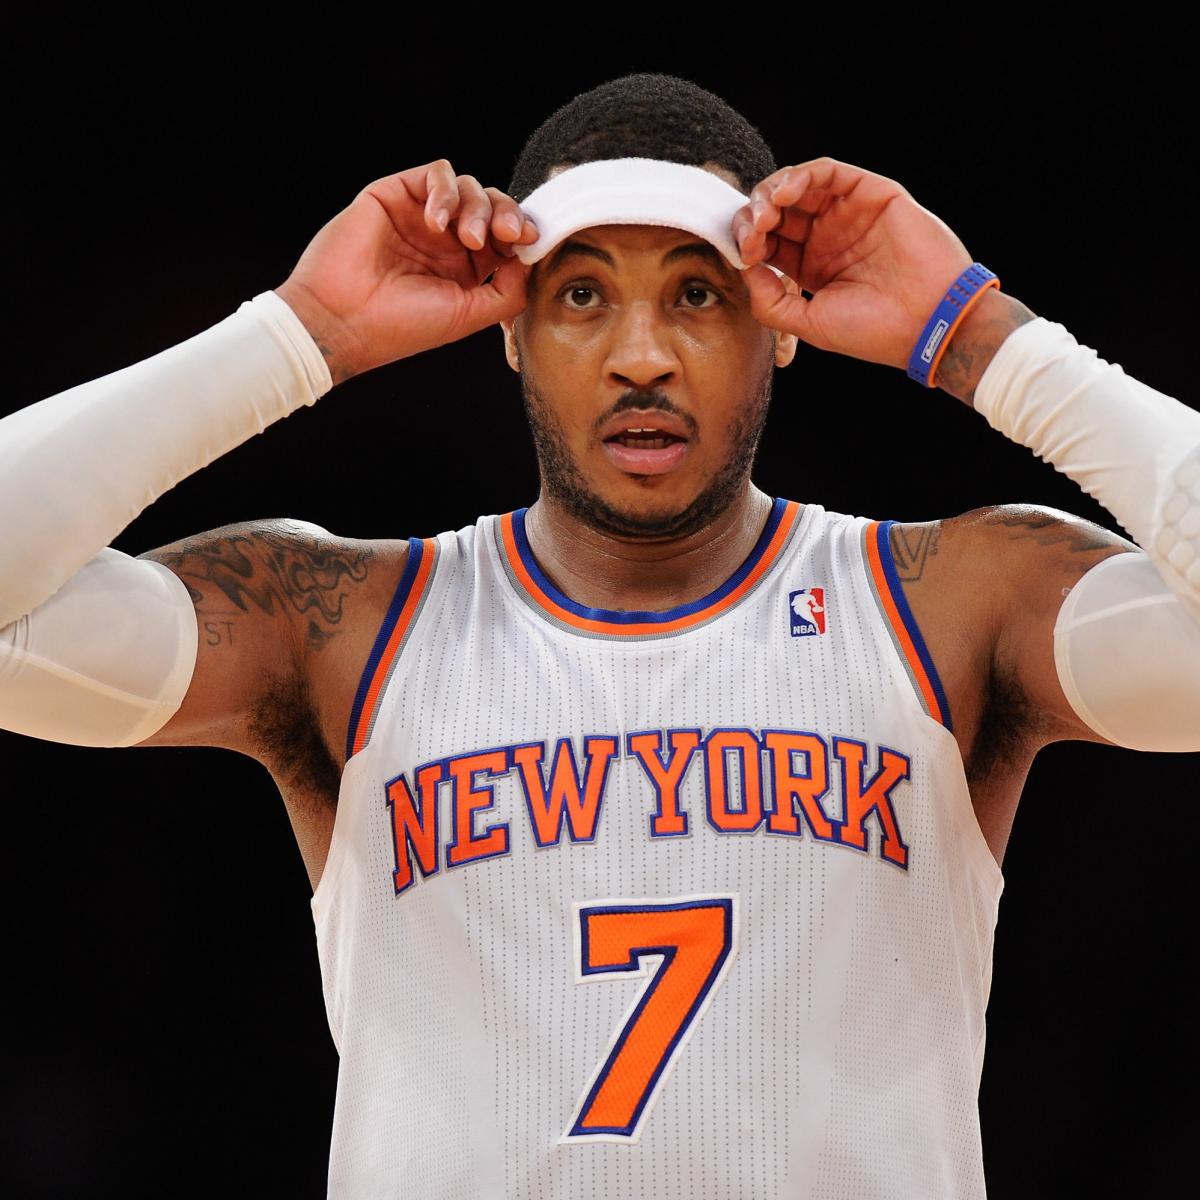 Carmelo Anthony brings star power back, earns guaranteed contract